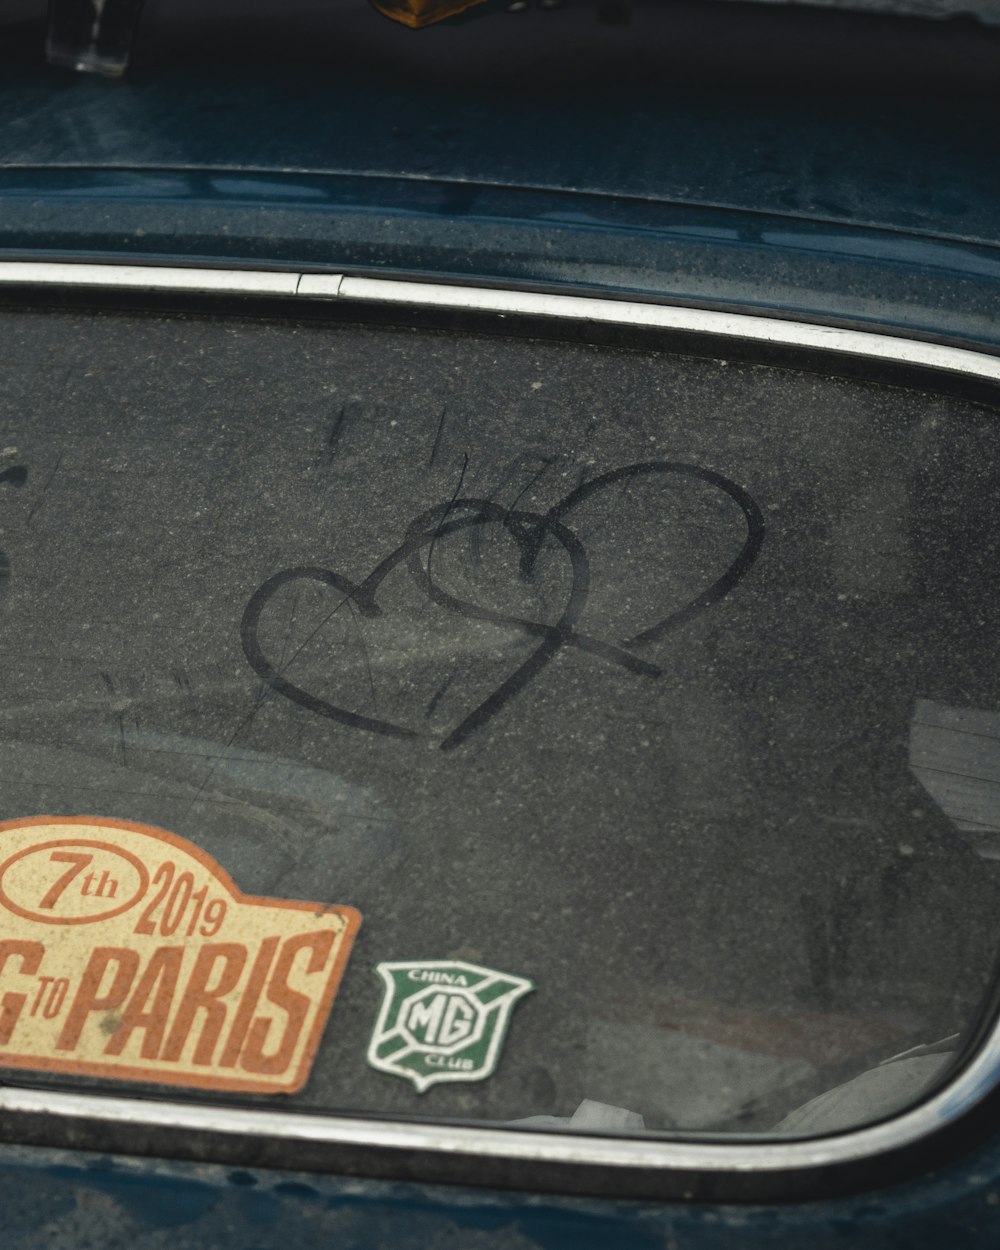 a close up of a car with graffiti on it